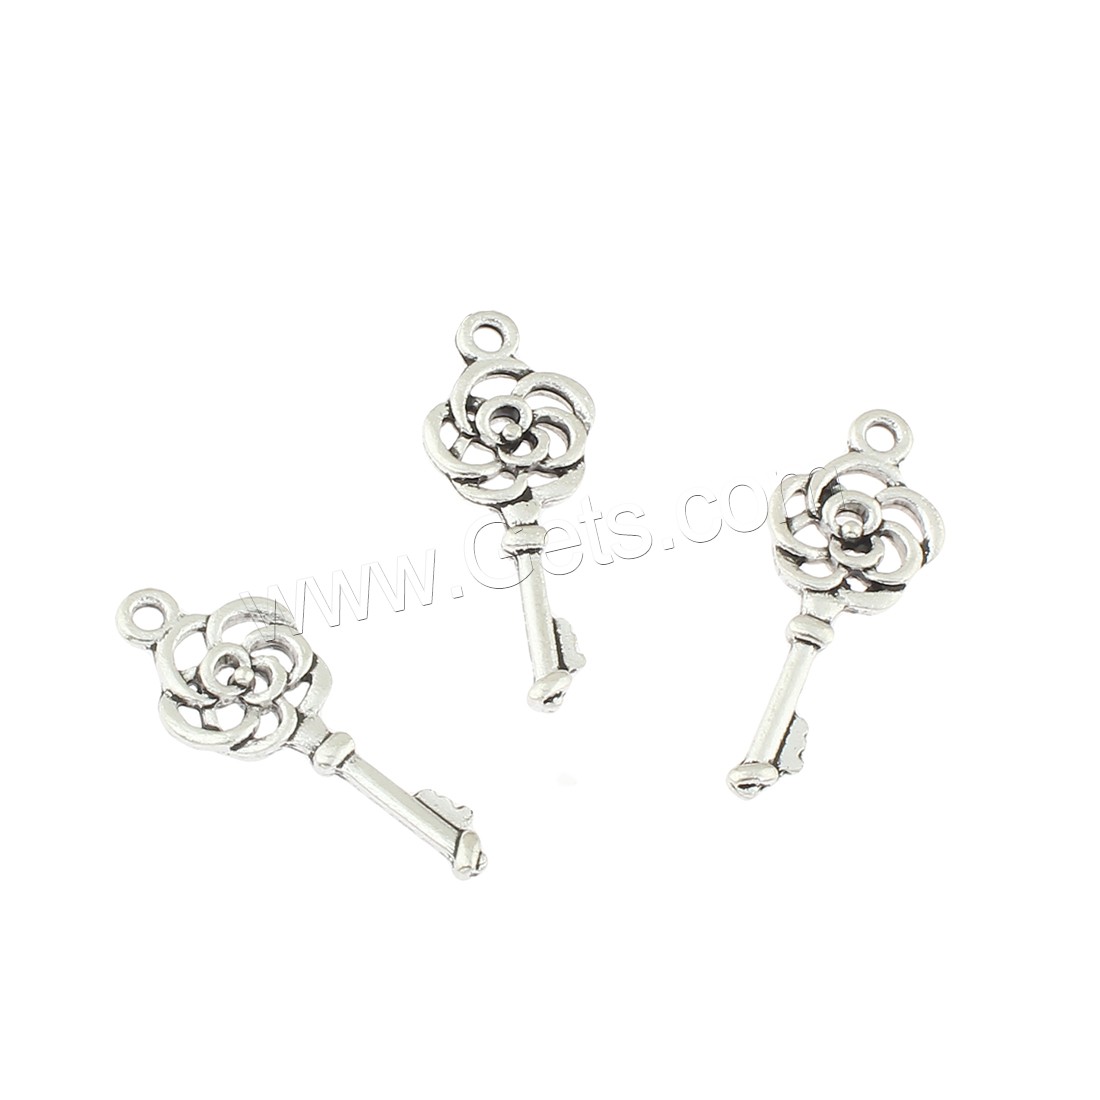 Zinc Alloy Jewelry Pendants, Key, antique silver color plated, 11x28x3mm, Hole:Approx 2mm, Approx 410PCs/Bag, Sold By Bag